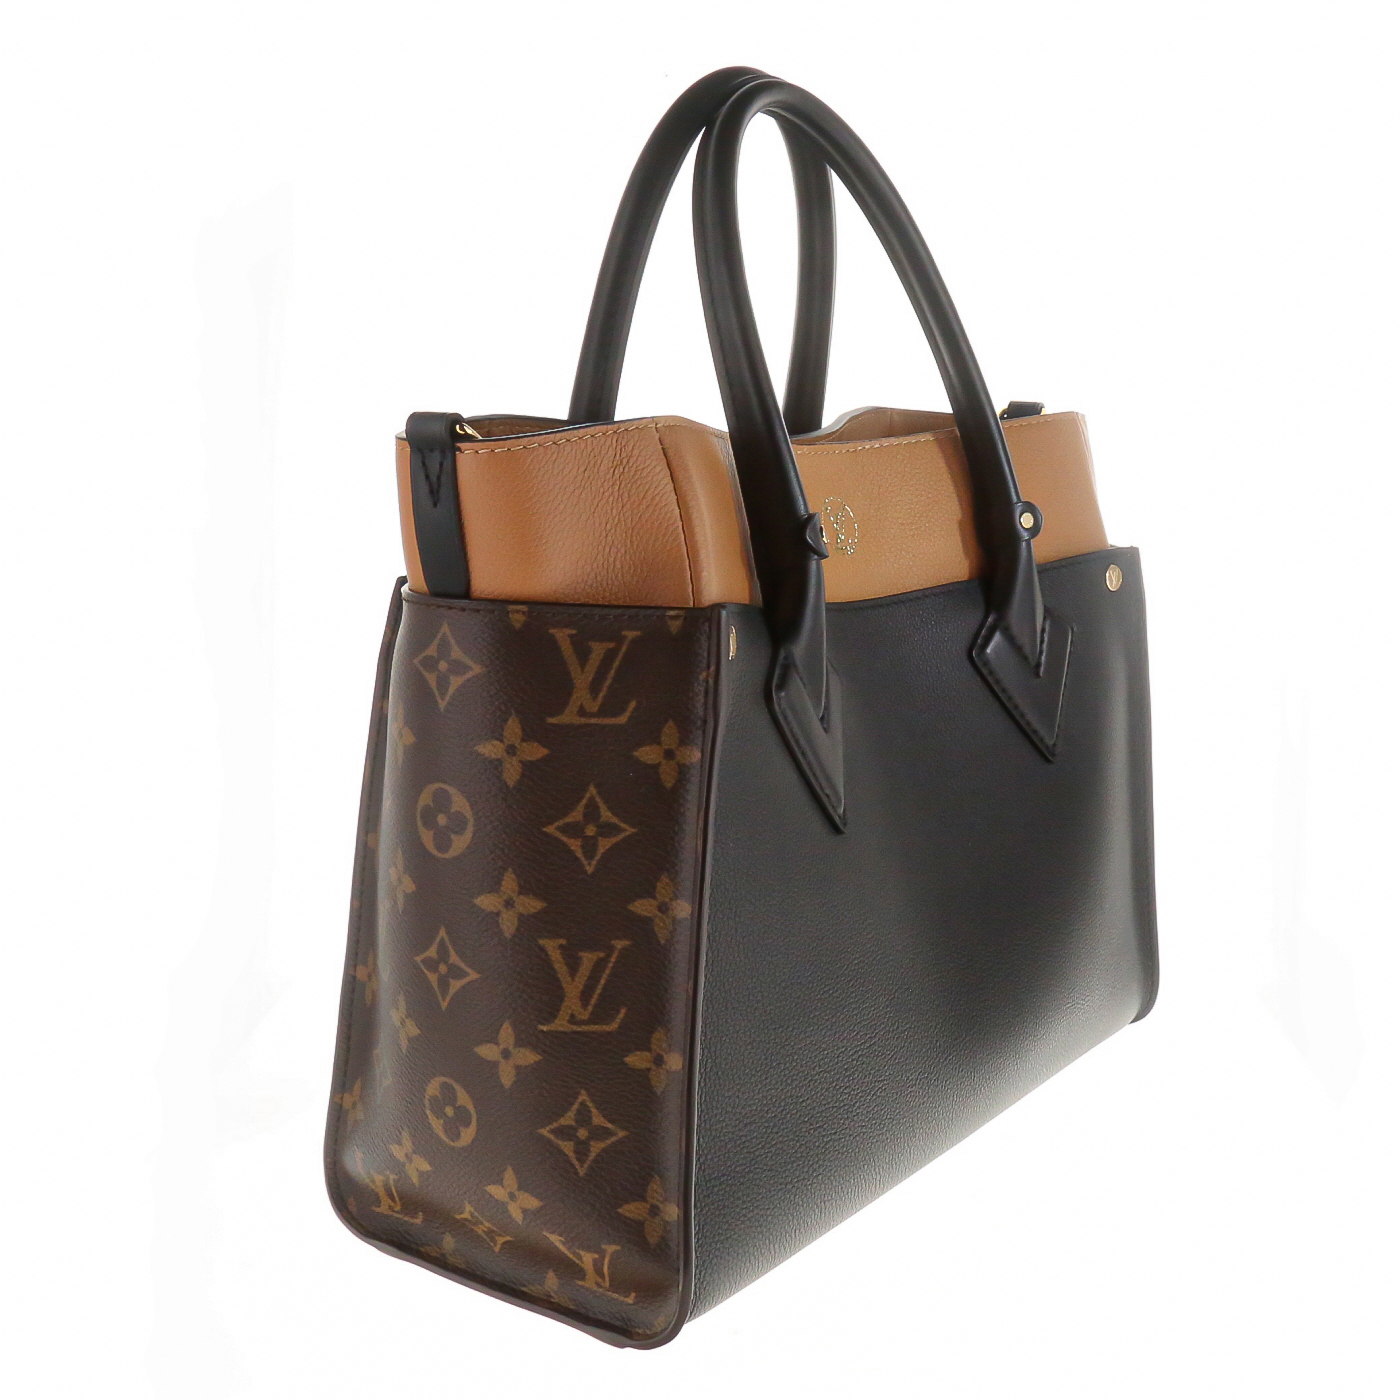 Louis Vuitton bag on my side